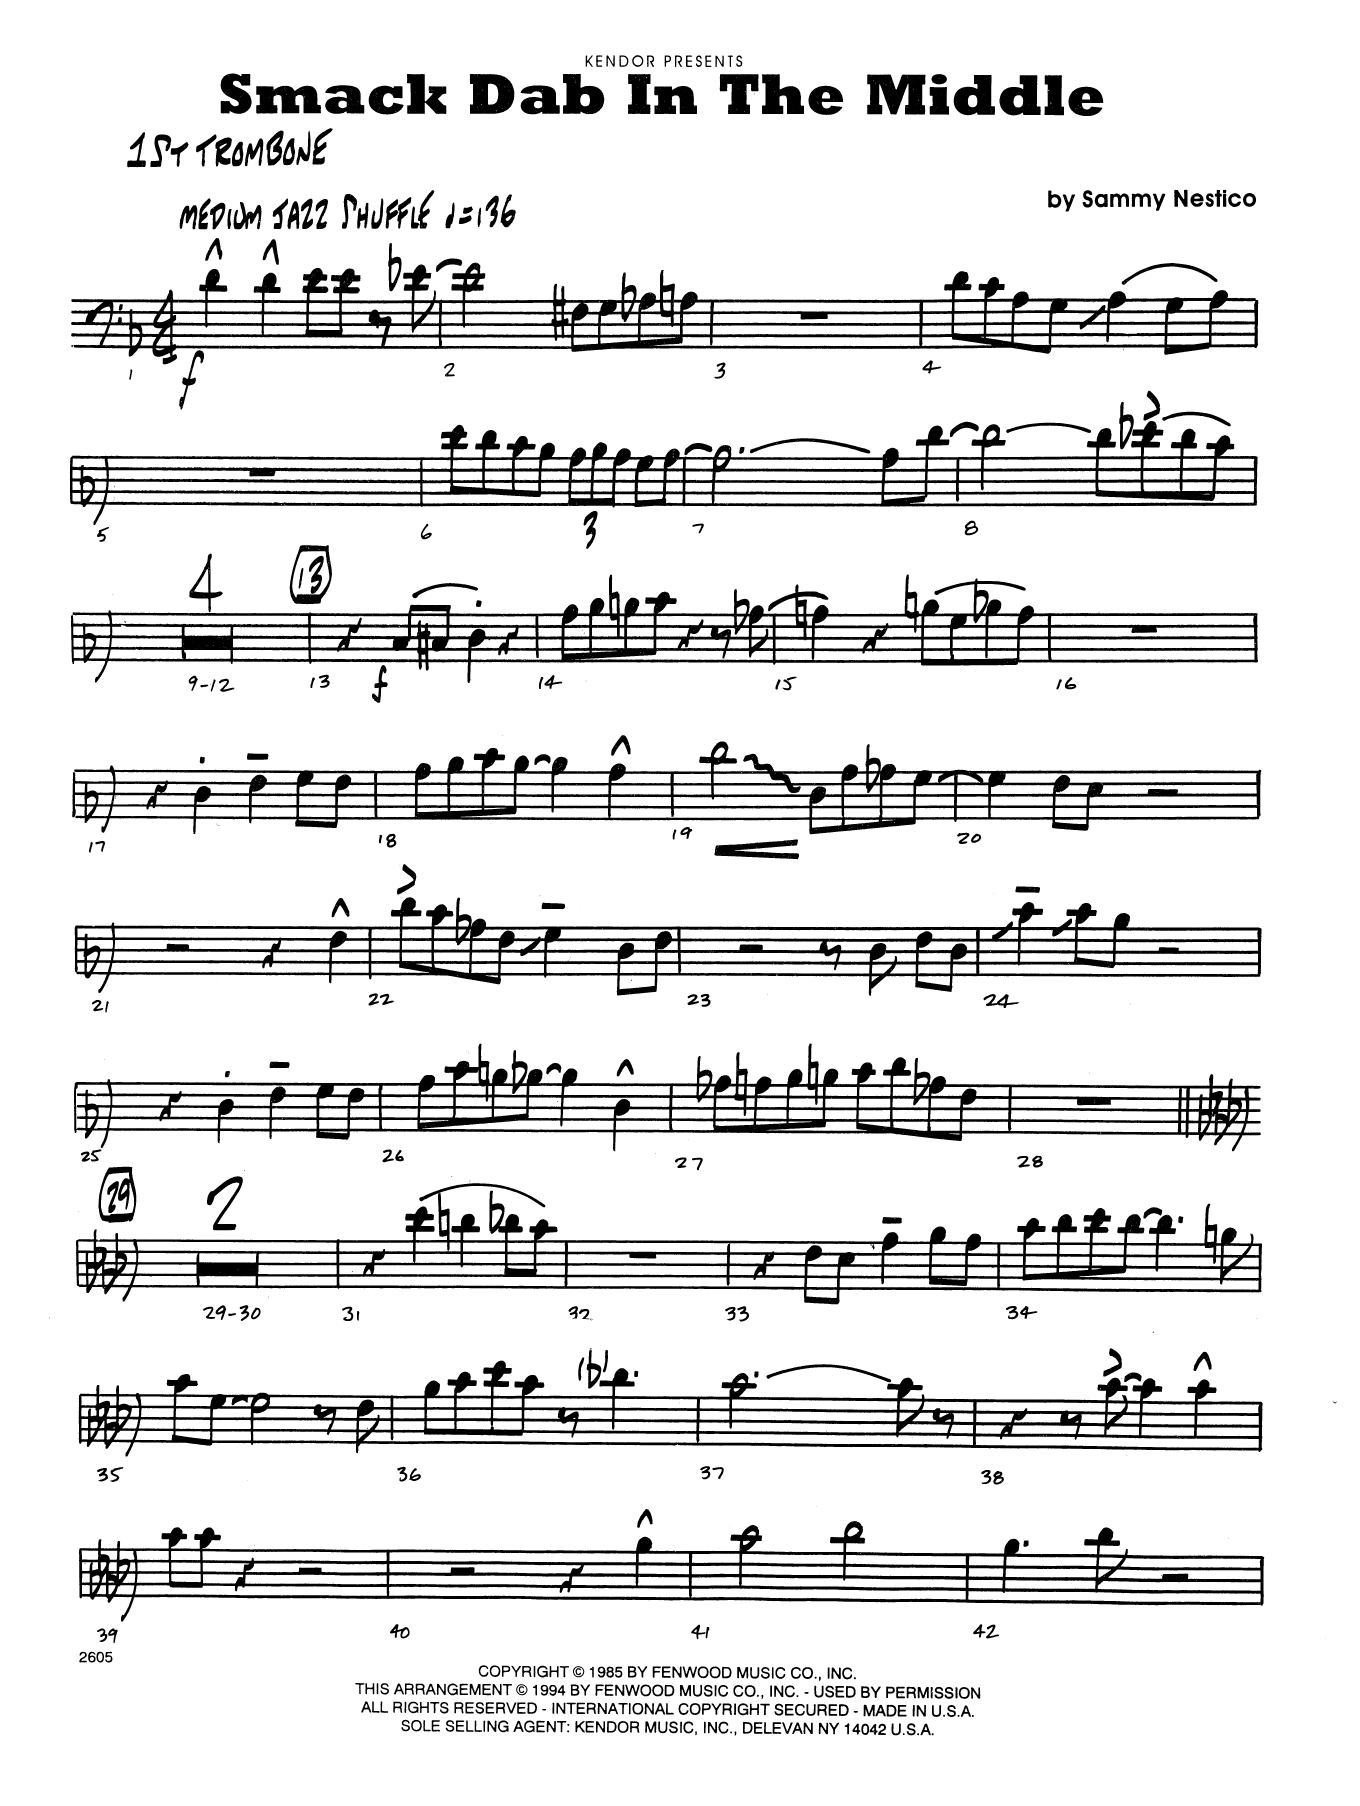 Download Sammy Nestico Smack Dab in the Middle - 1st Trombone Sheet Music